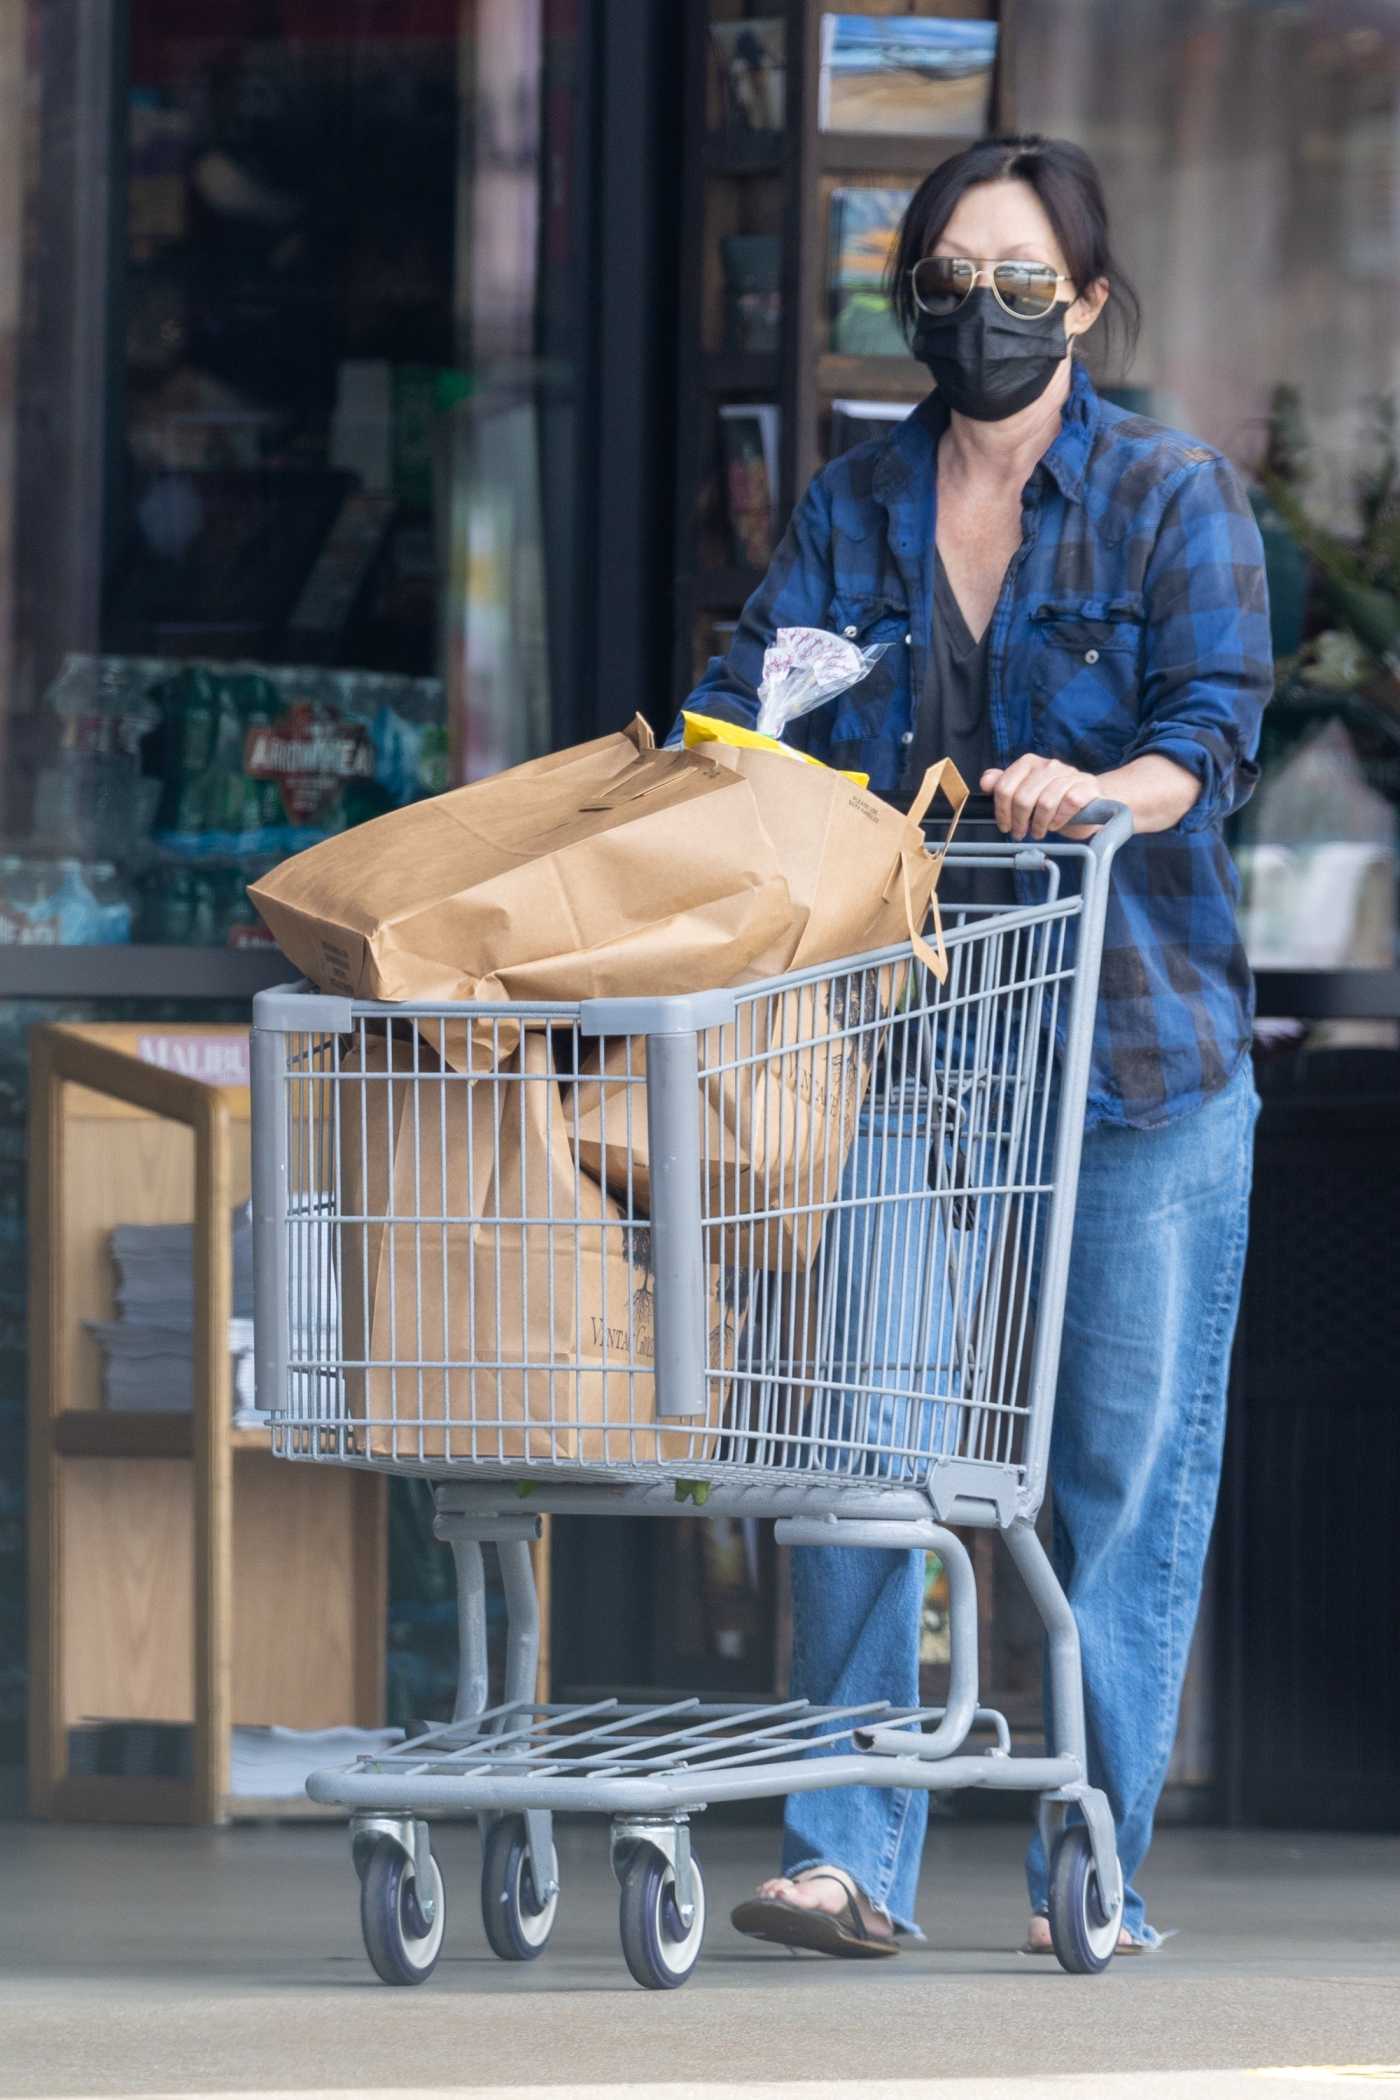 Shannen Doherty in a Plaid Shirt Goes on a Grocery Run in Malibu 06/04/2021